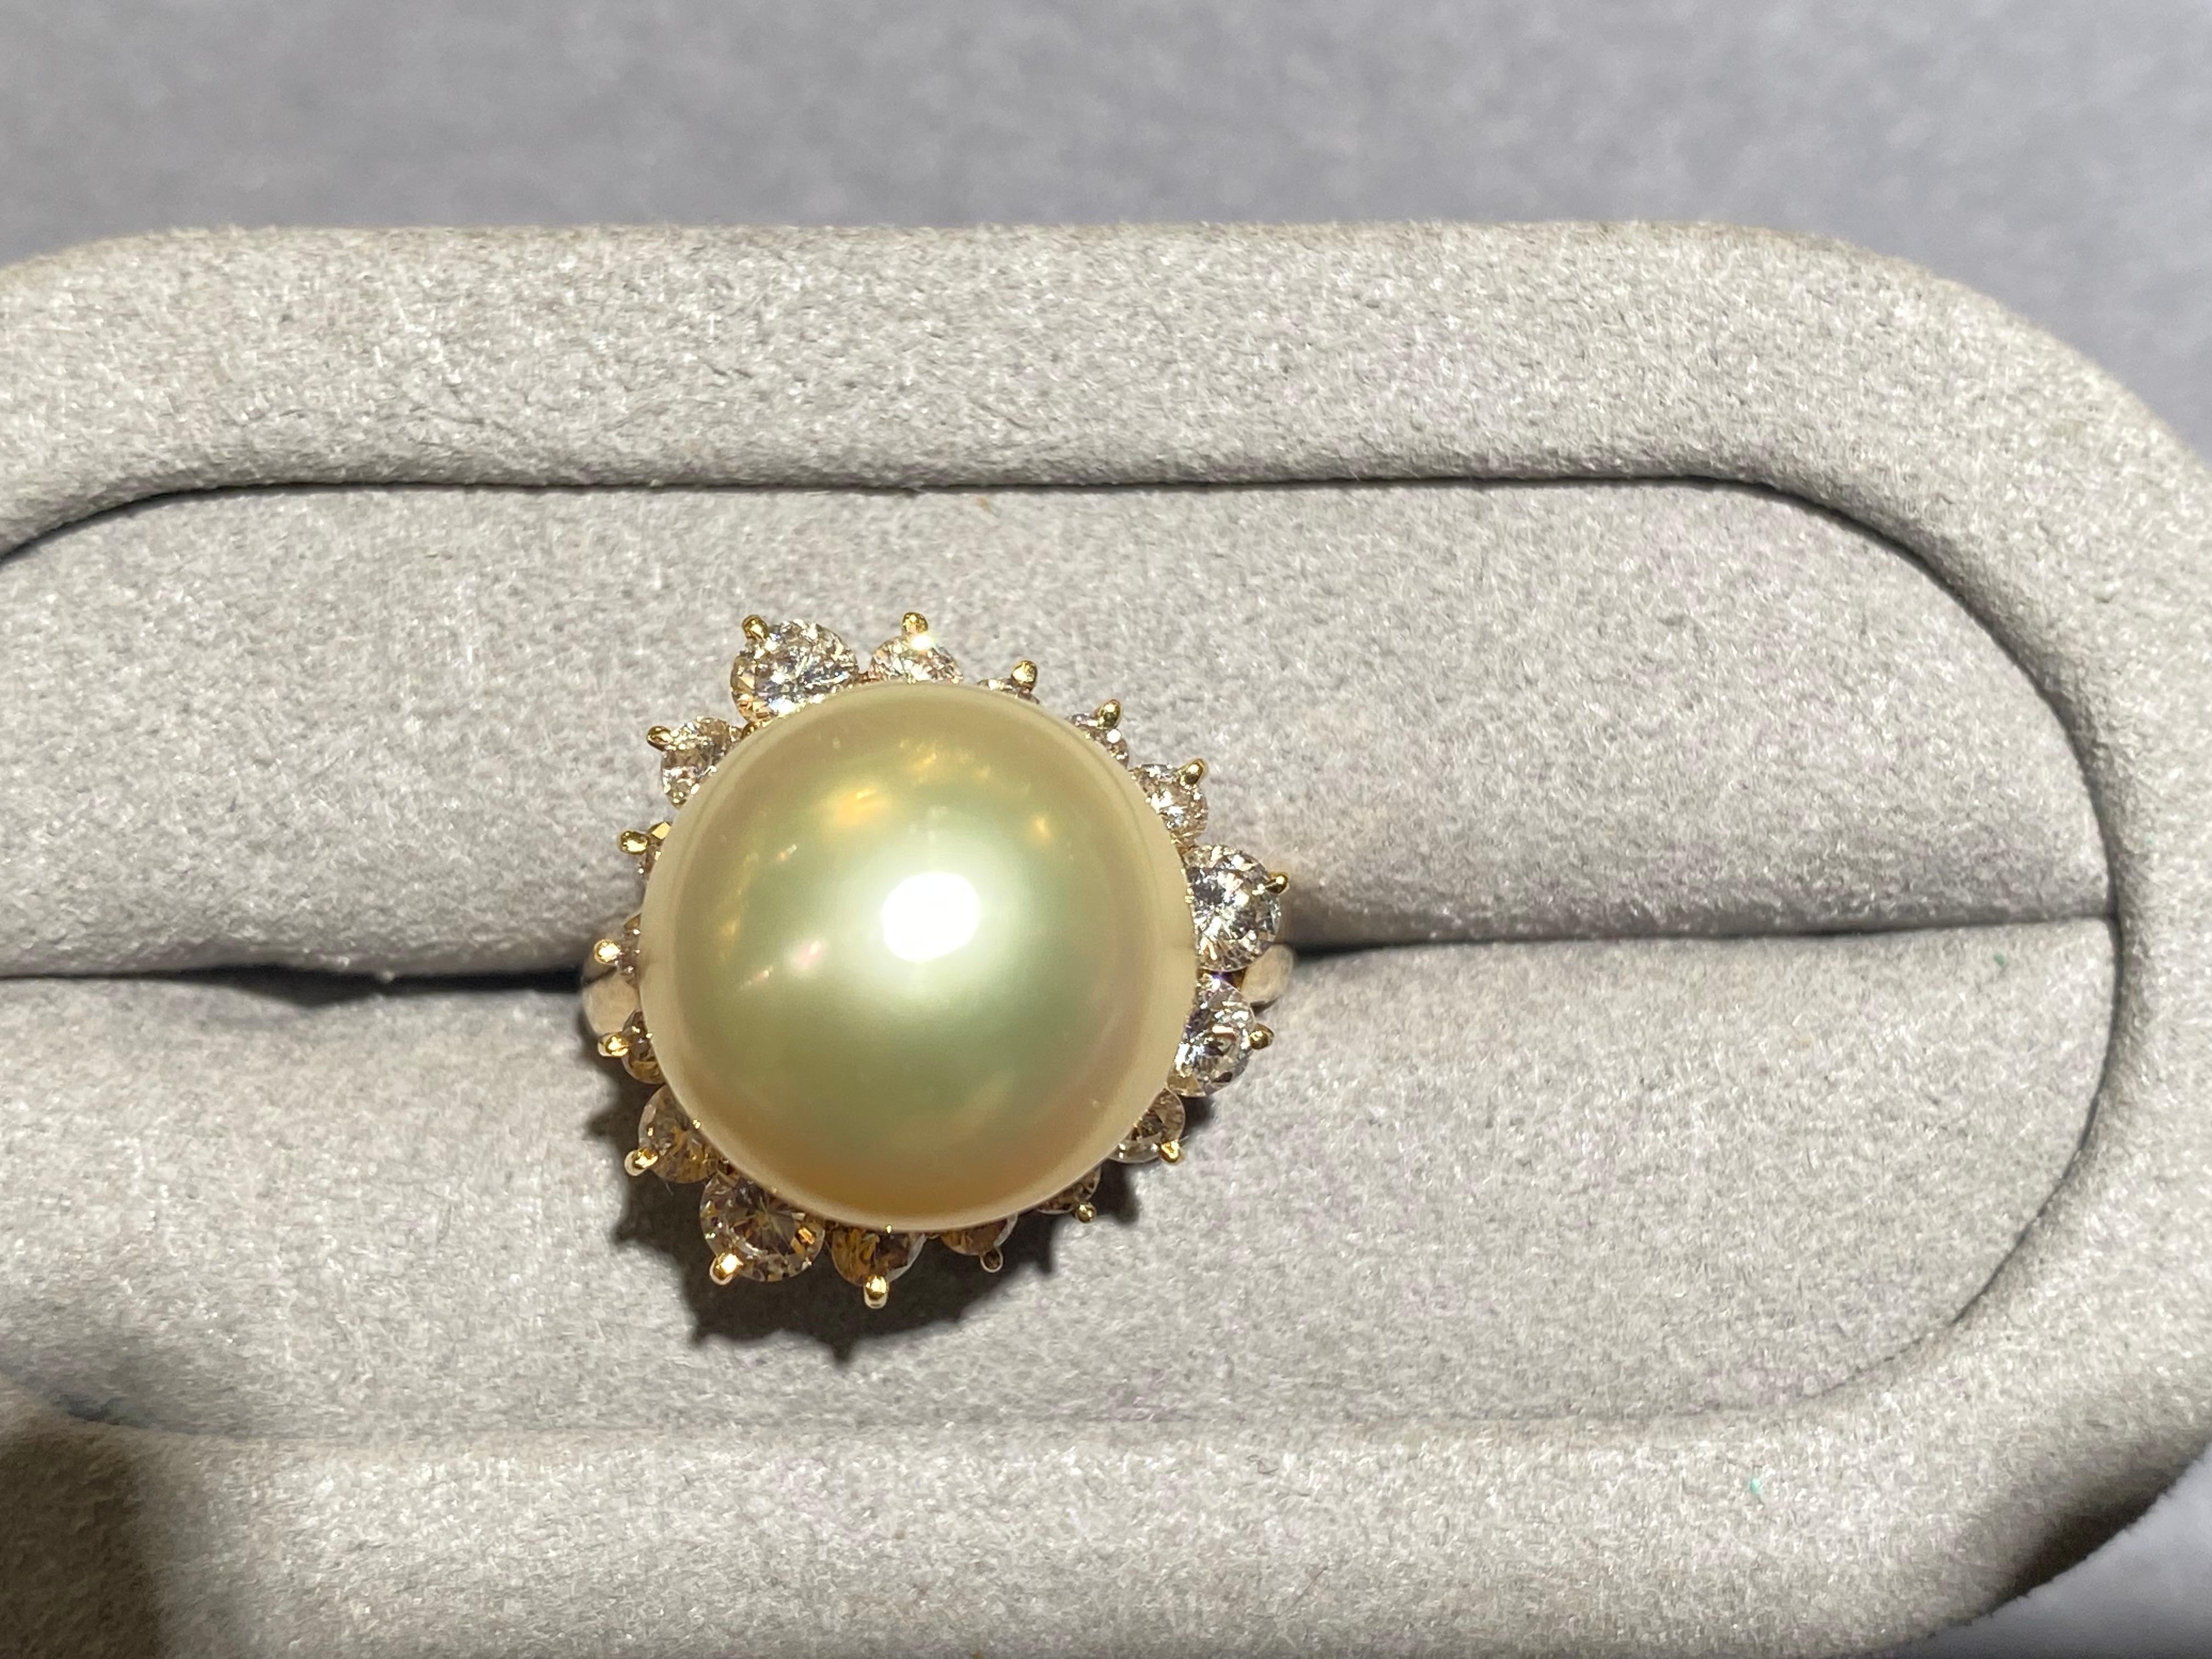 A light champagne colour south sea pearl and diaond ring in 18k yellow gold. The south sea pearl is round in shape and measuring 13.7 mm. The pearl is set in the middle of the ring and is surrounded by a circle of diamonds. This is a modified